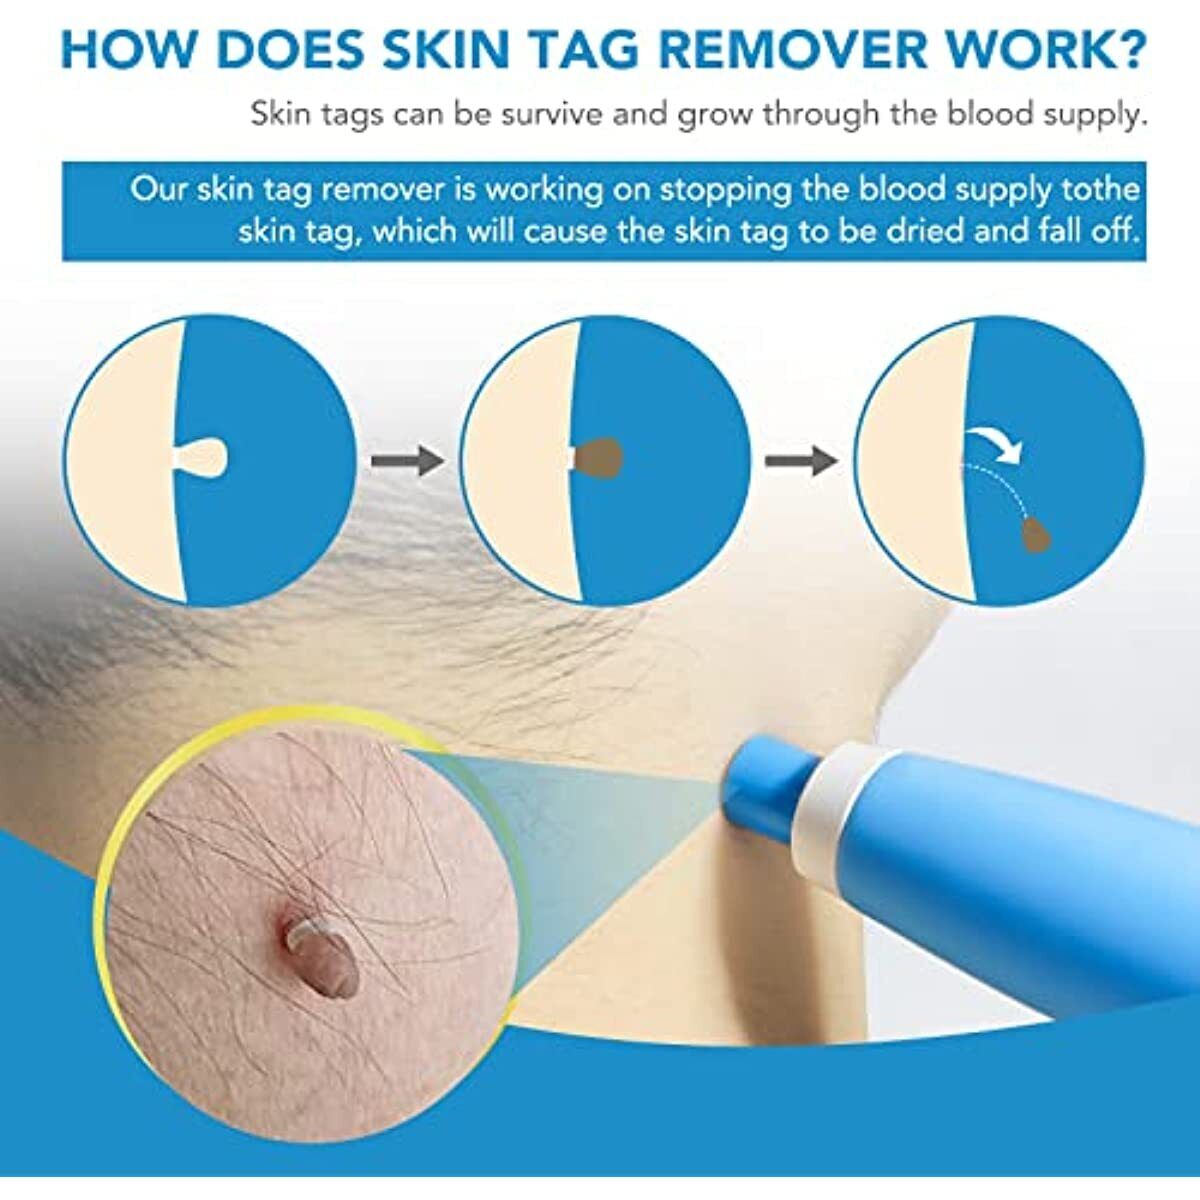 2 in 1 Auto Micro Skin Tag Remover Device Kit Safe Painless Removal 2-8 mm Tool